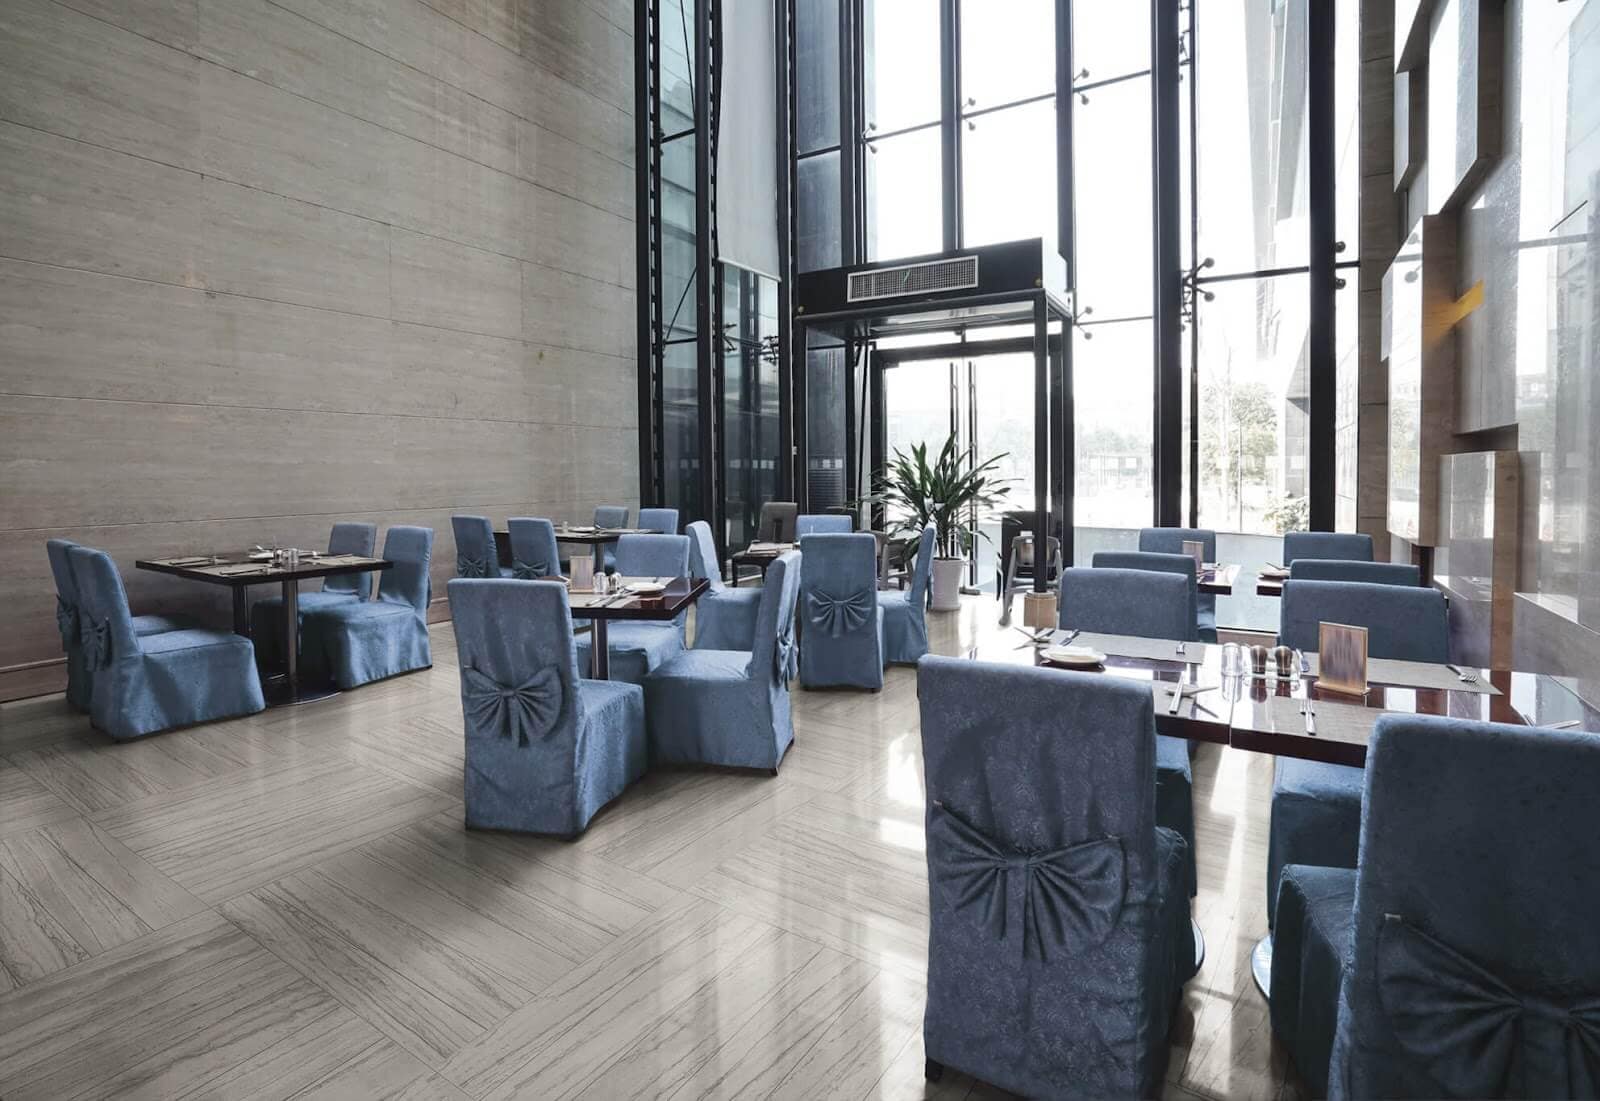 Dining space in hotel with creamy ceramic tiles